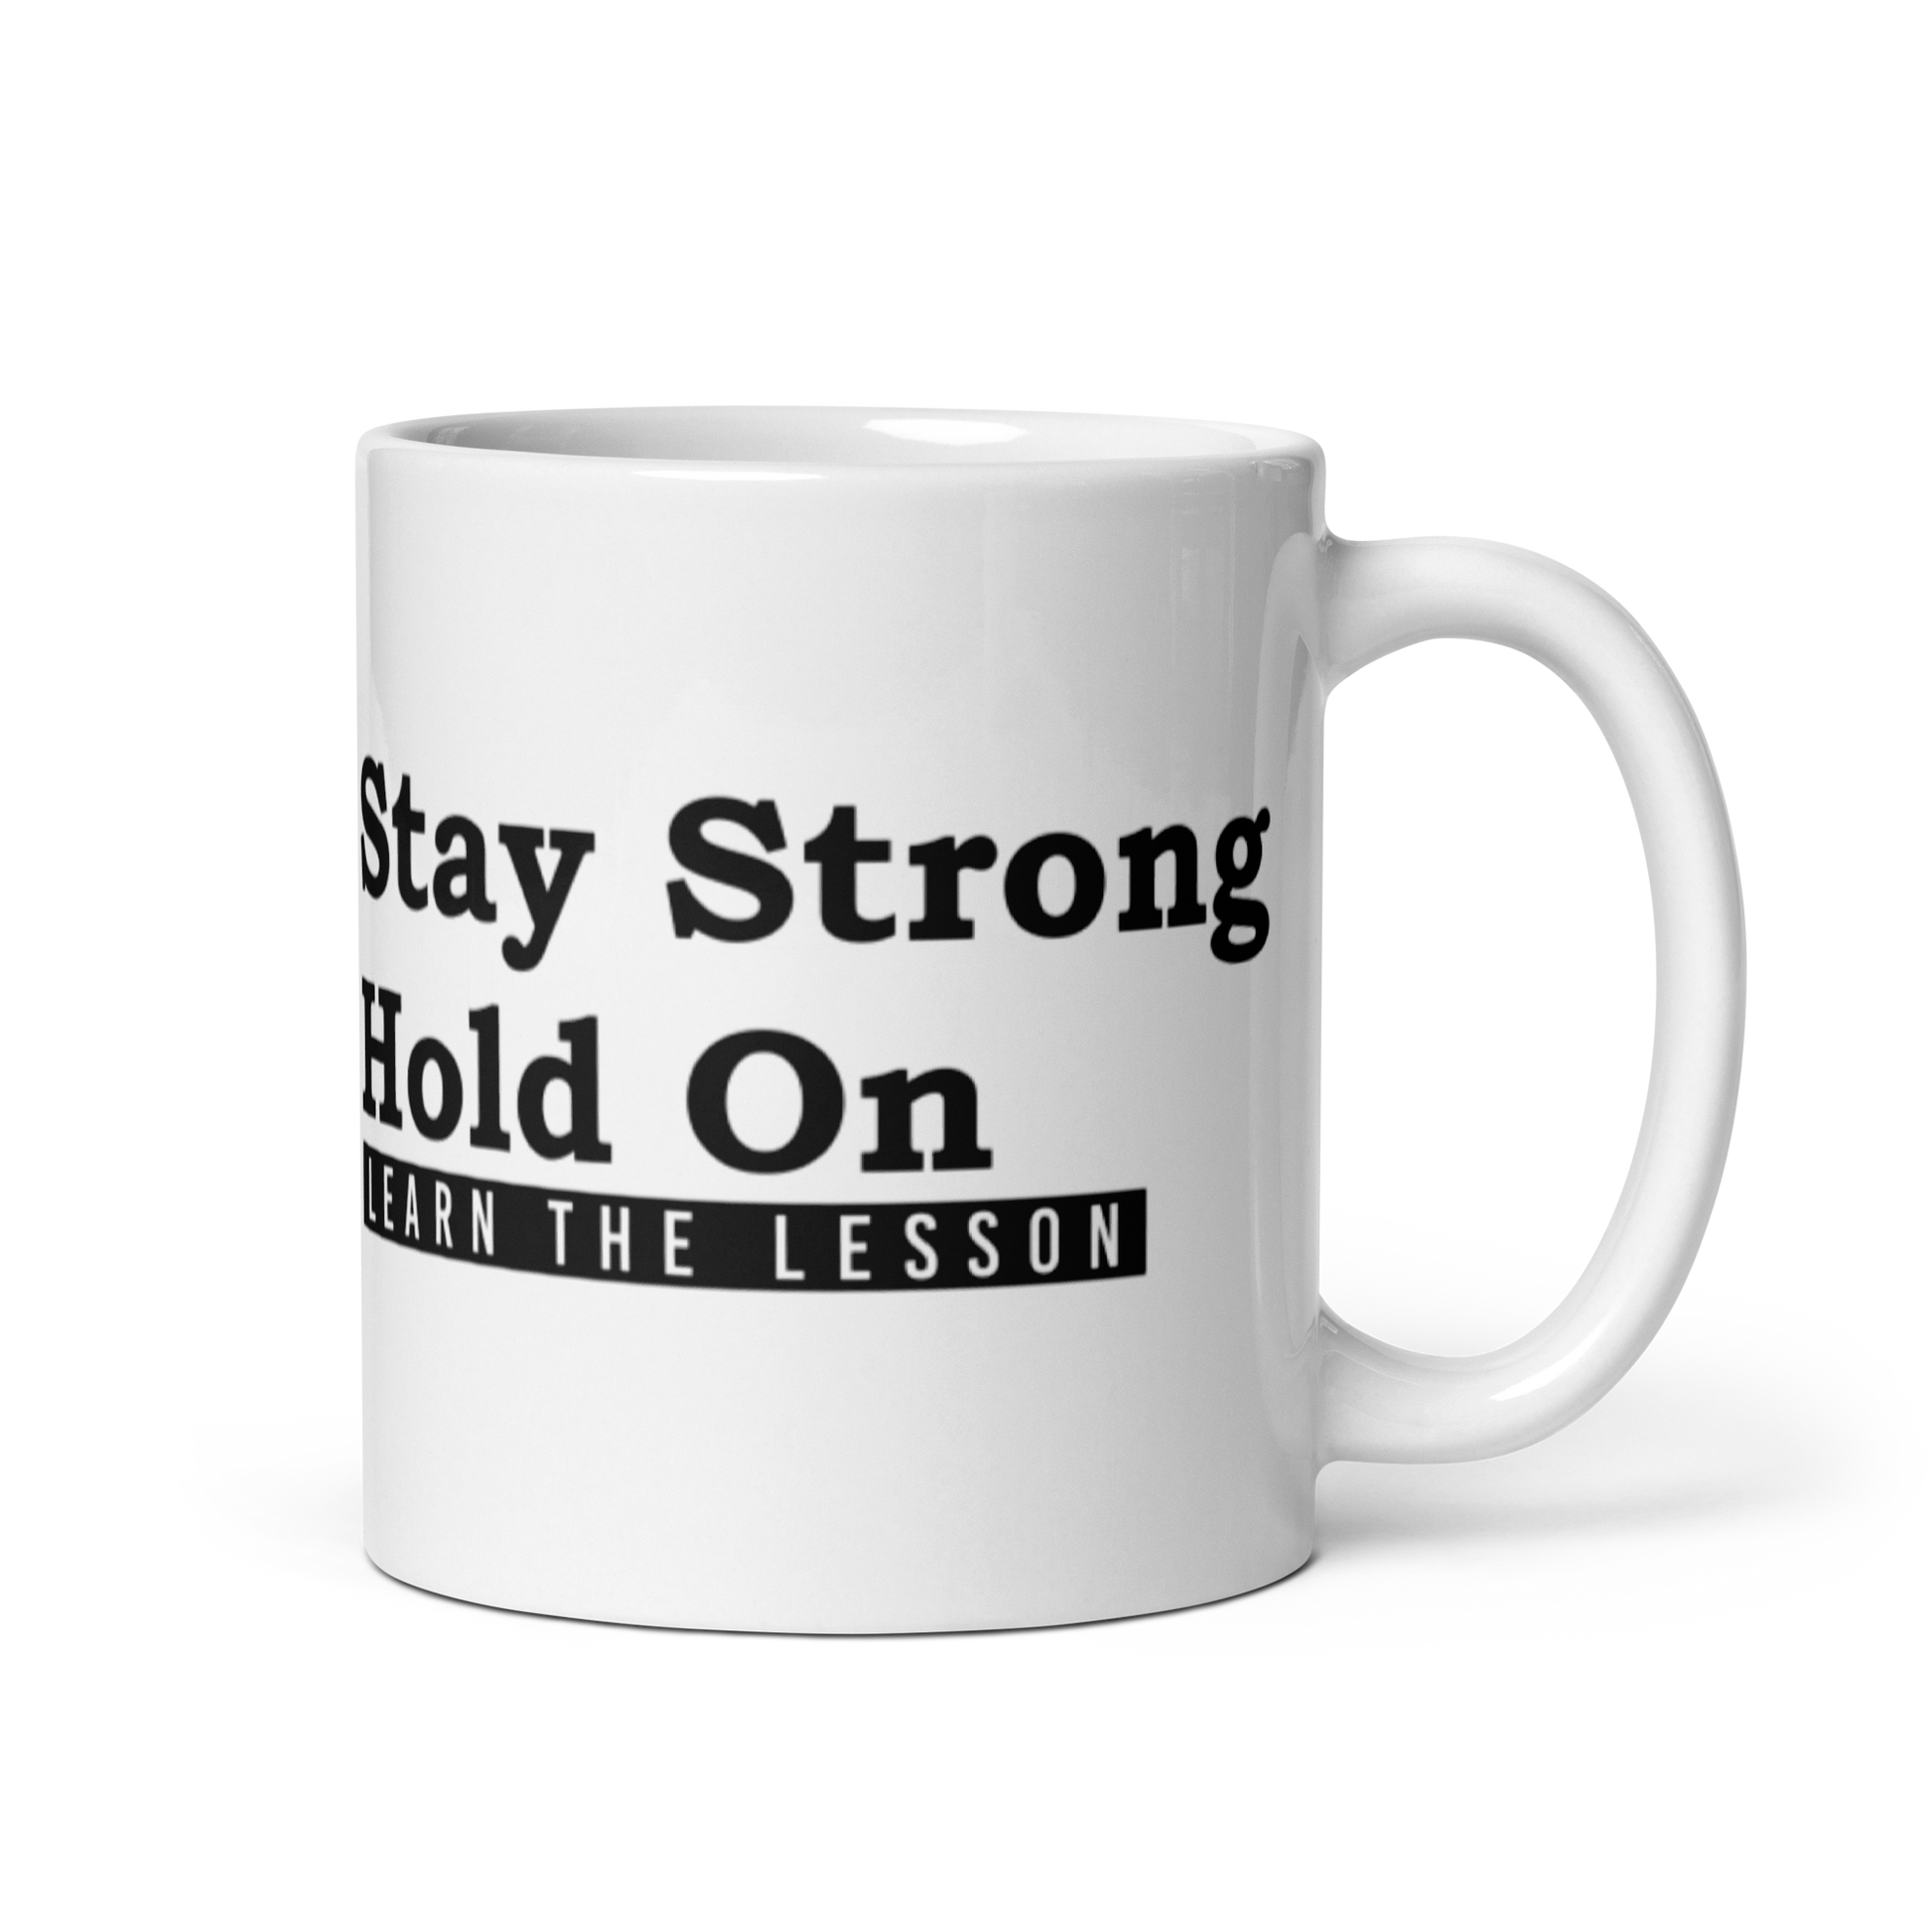 Stay Strong. Hold on. Learn the Lesson. White Glossy Mug KimUnity Soulutions 